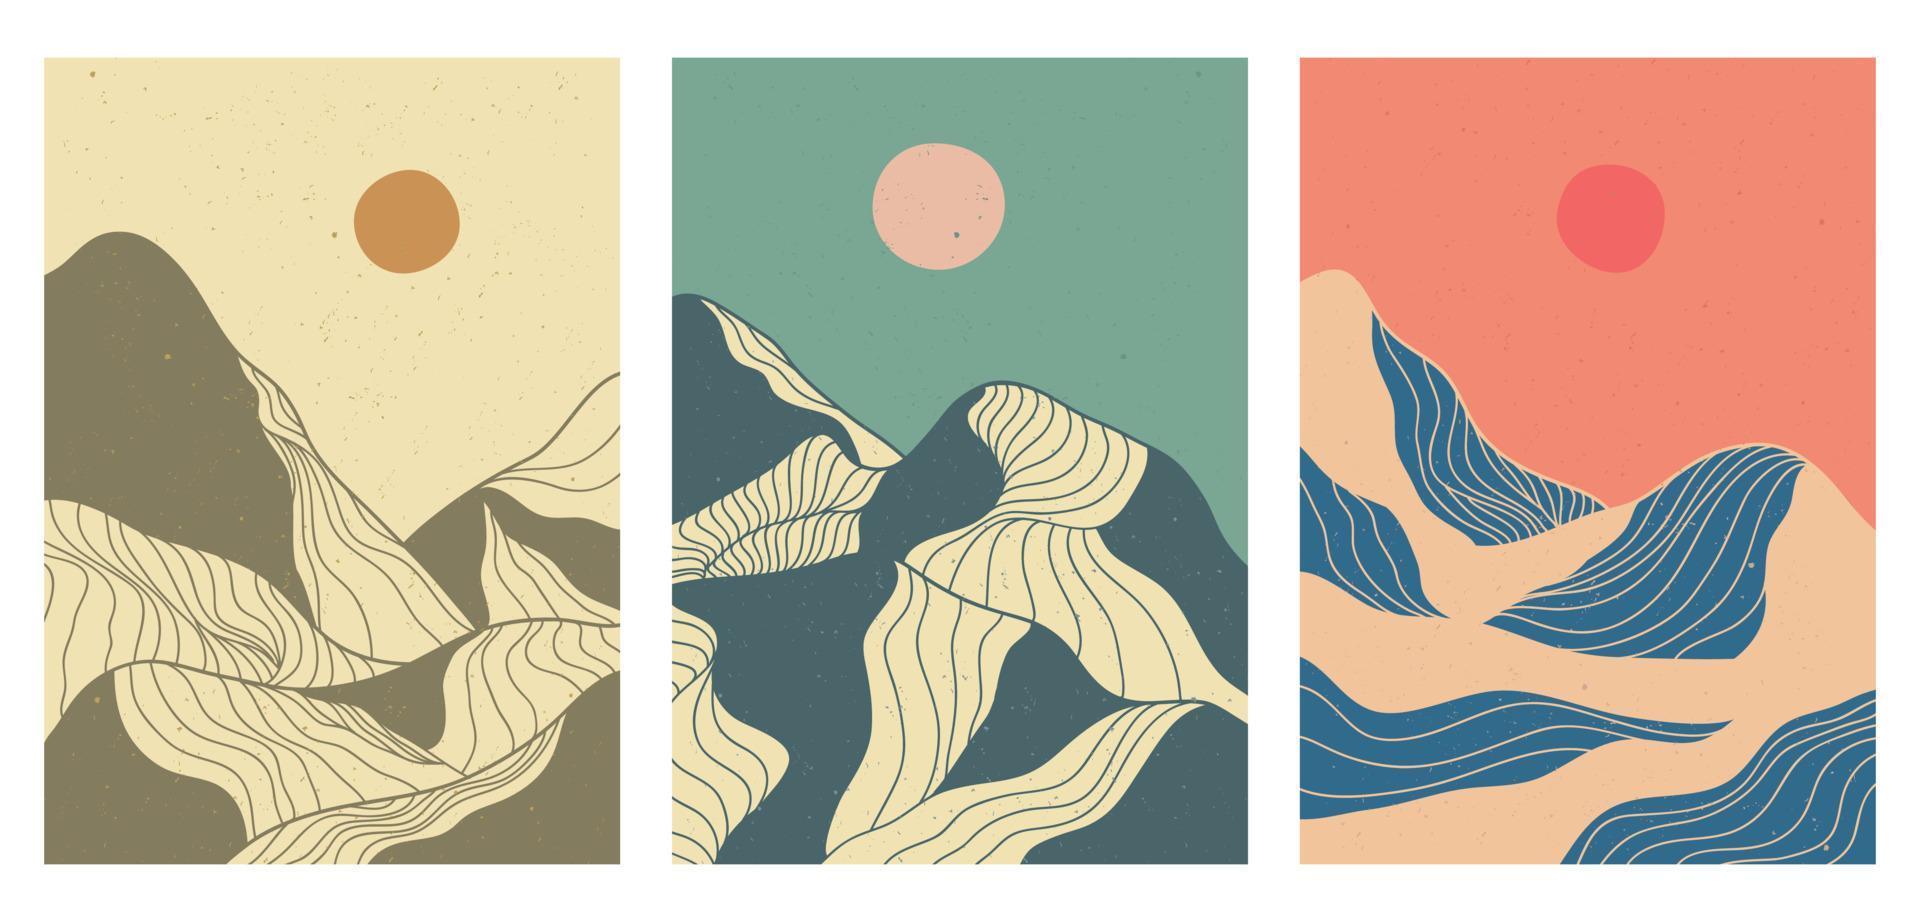 Mountain in vintage style. Mid century modern minimalist art print on set. Abstract contemporary aesthetic backgrounds landscapes. vector illustrations